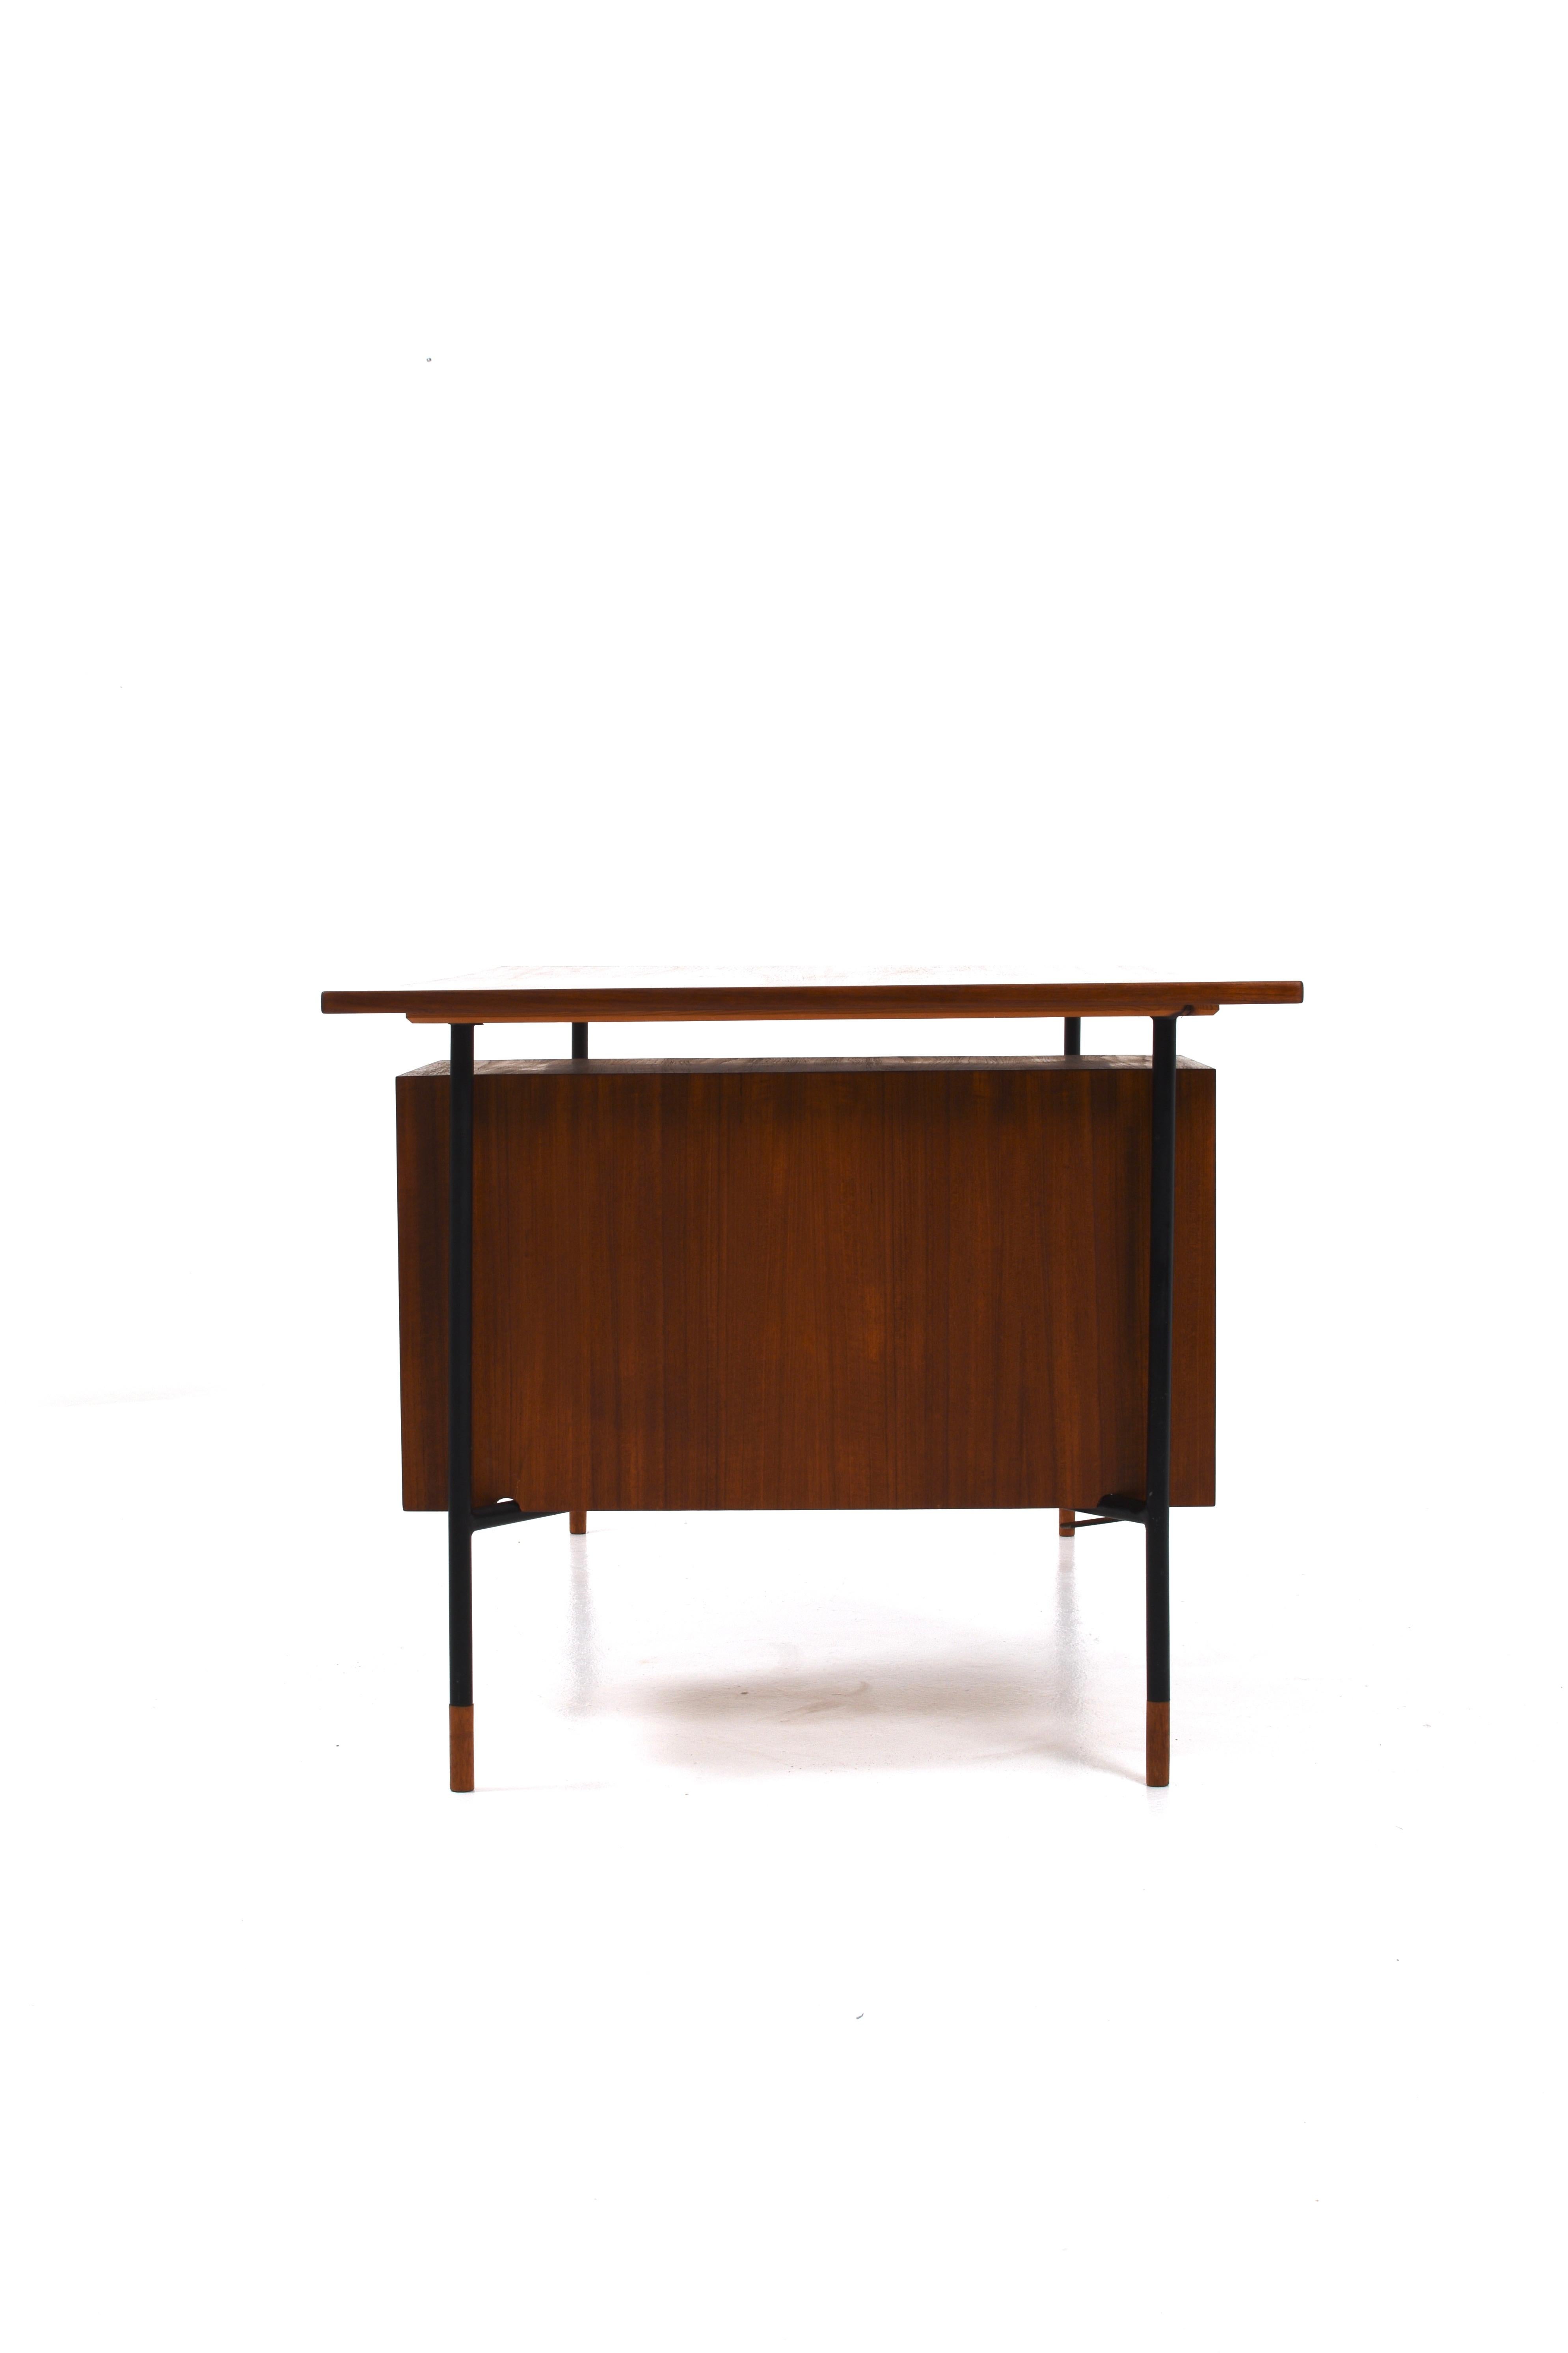 Rare Desk H-55 by Åke Hassbjer in teak and steel base, 1950s For Sale 5